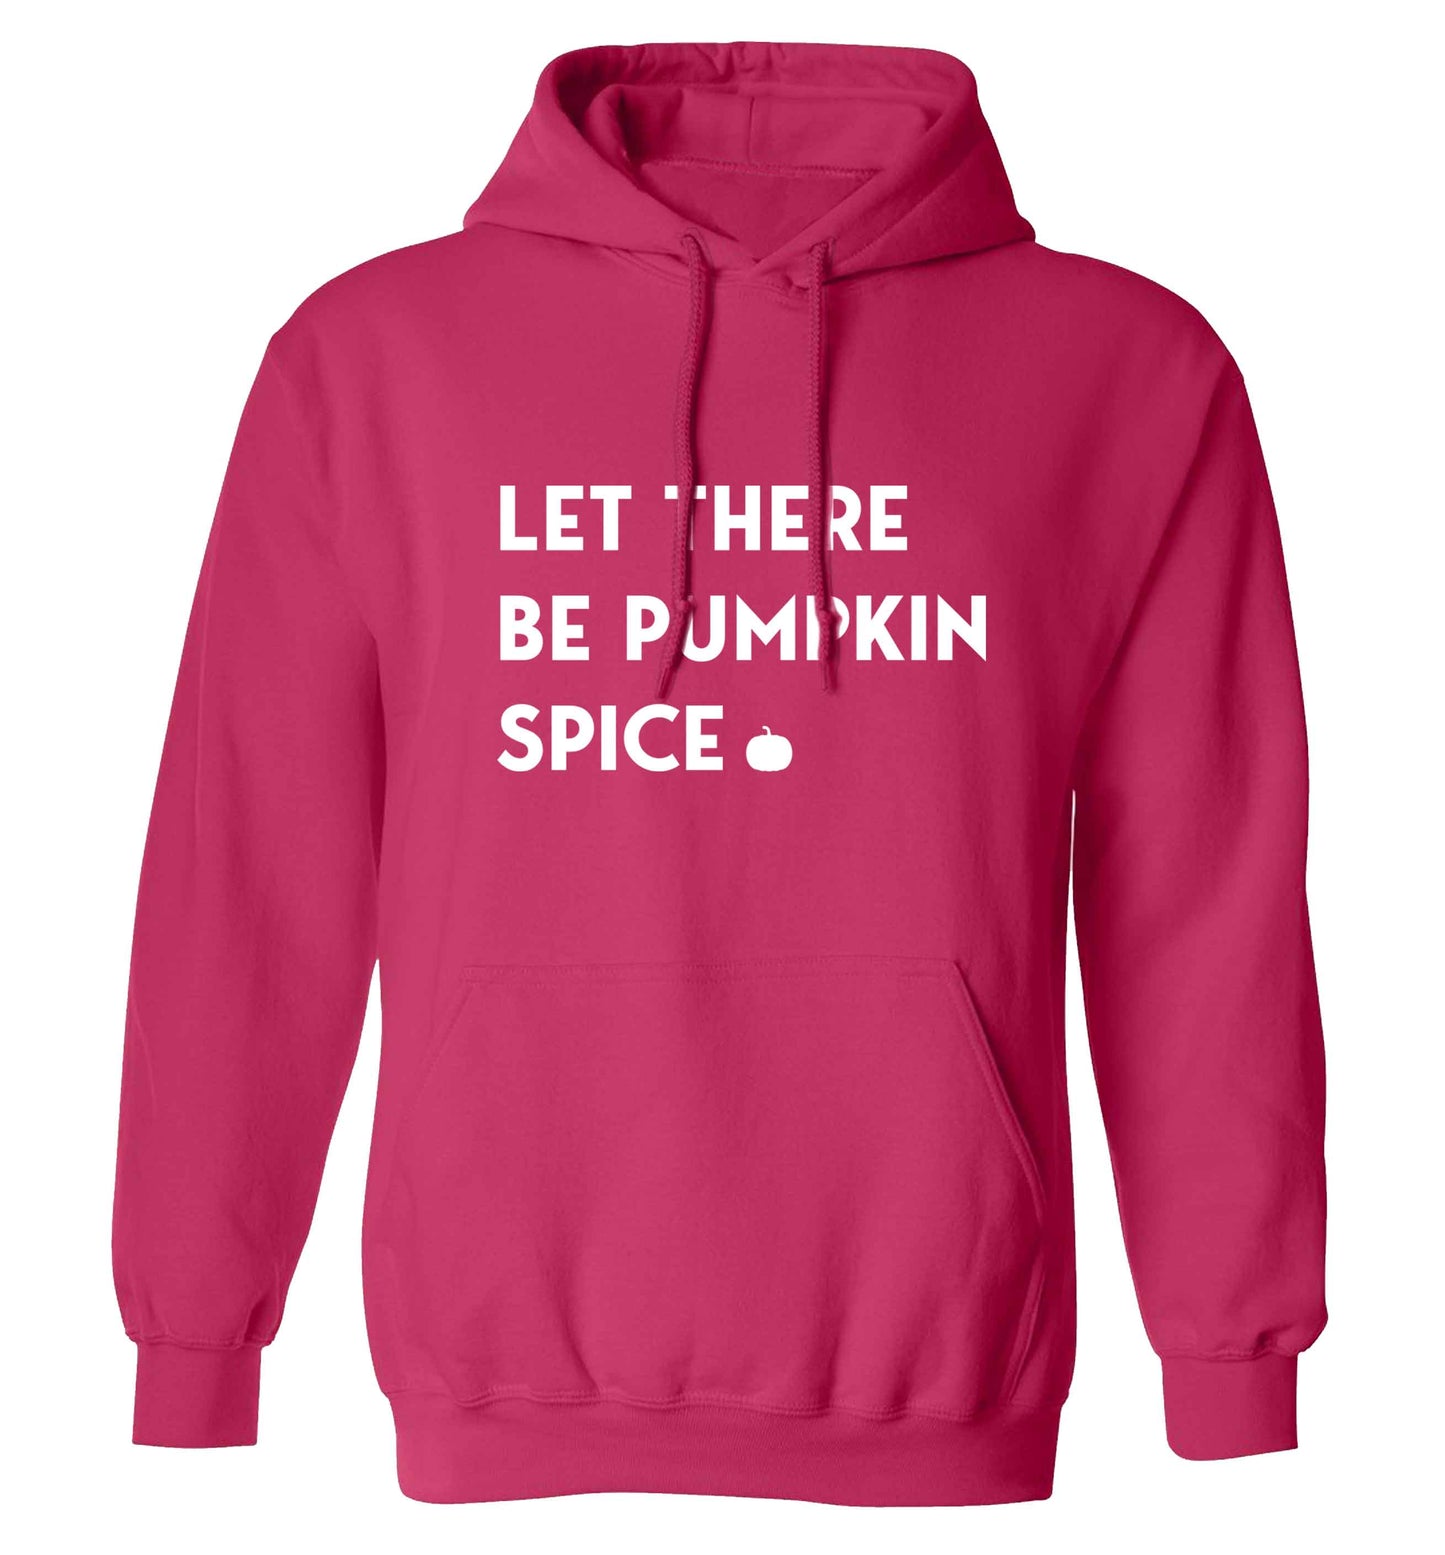 Let Be Pumpkin Spice adults unisex pink hoodie 2XL